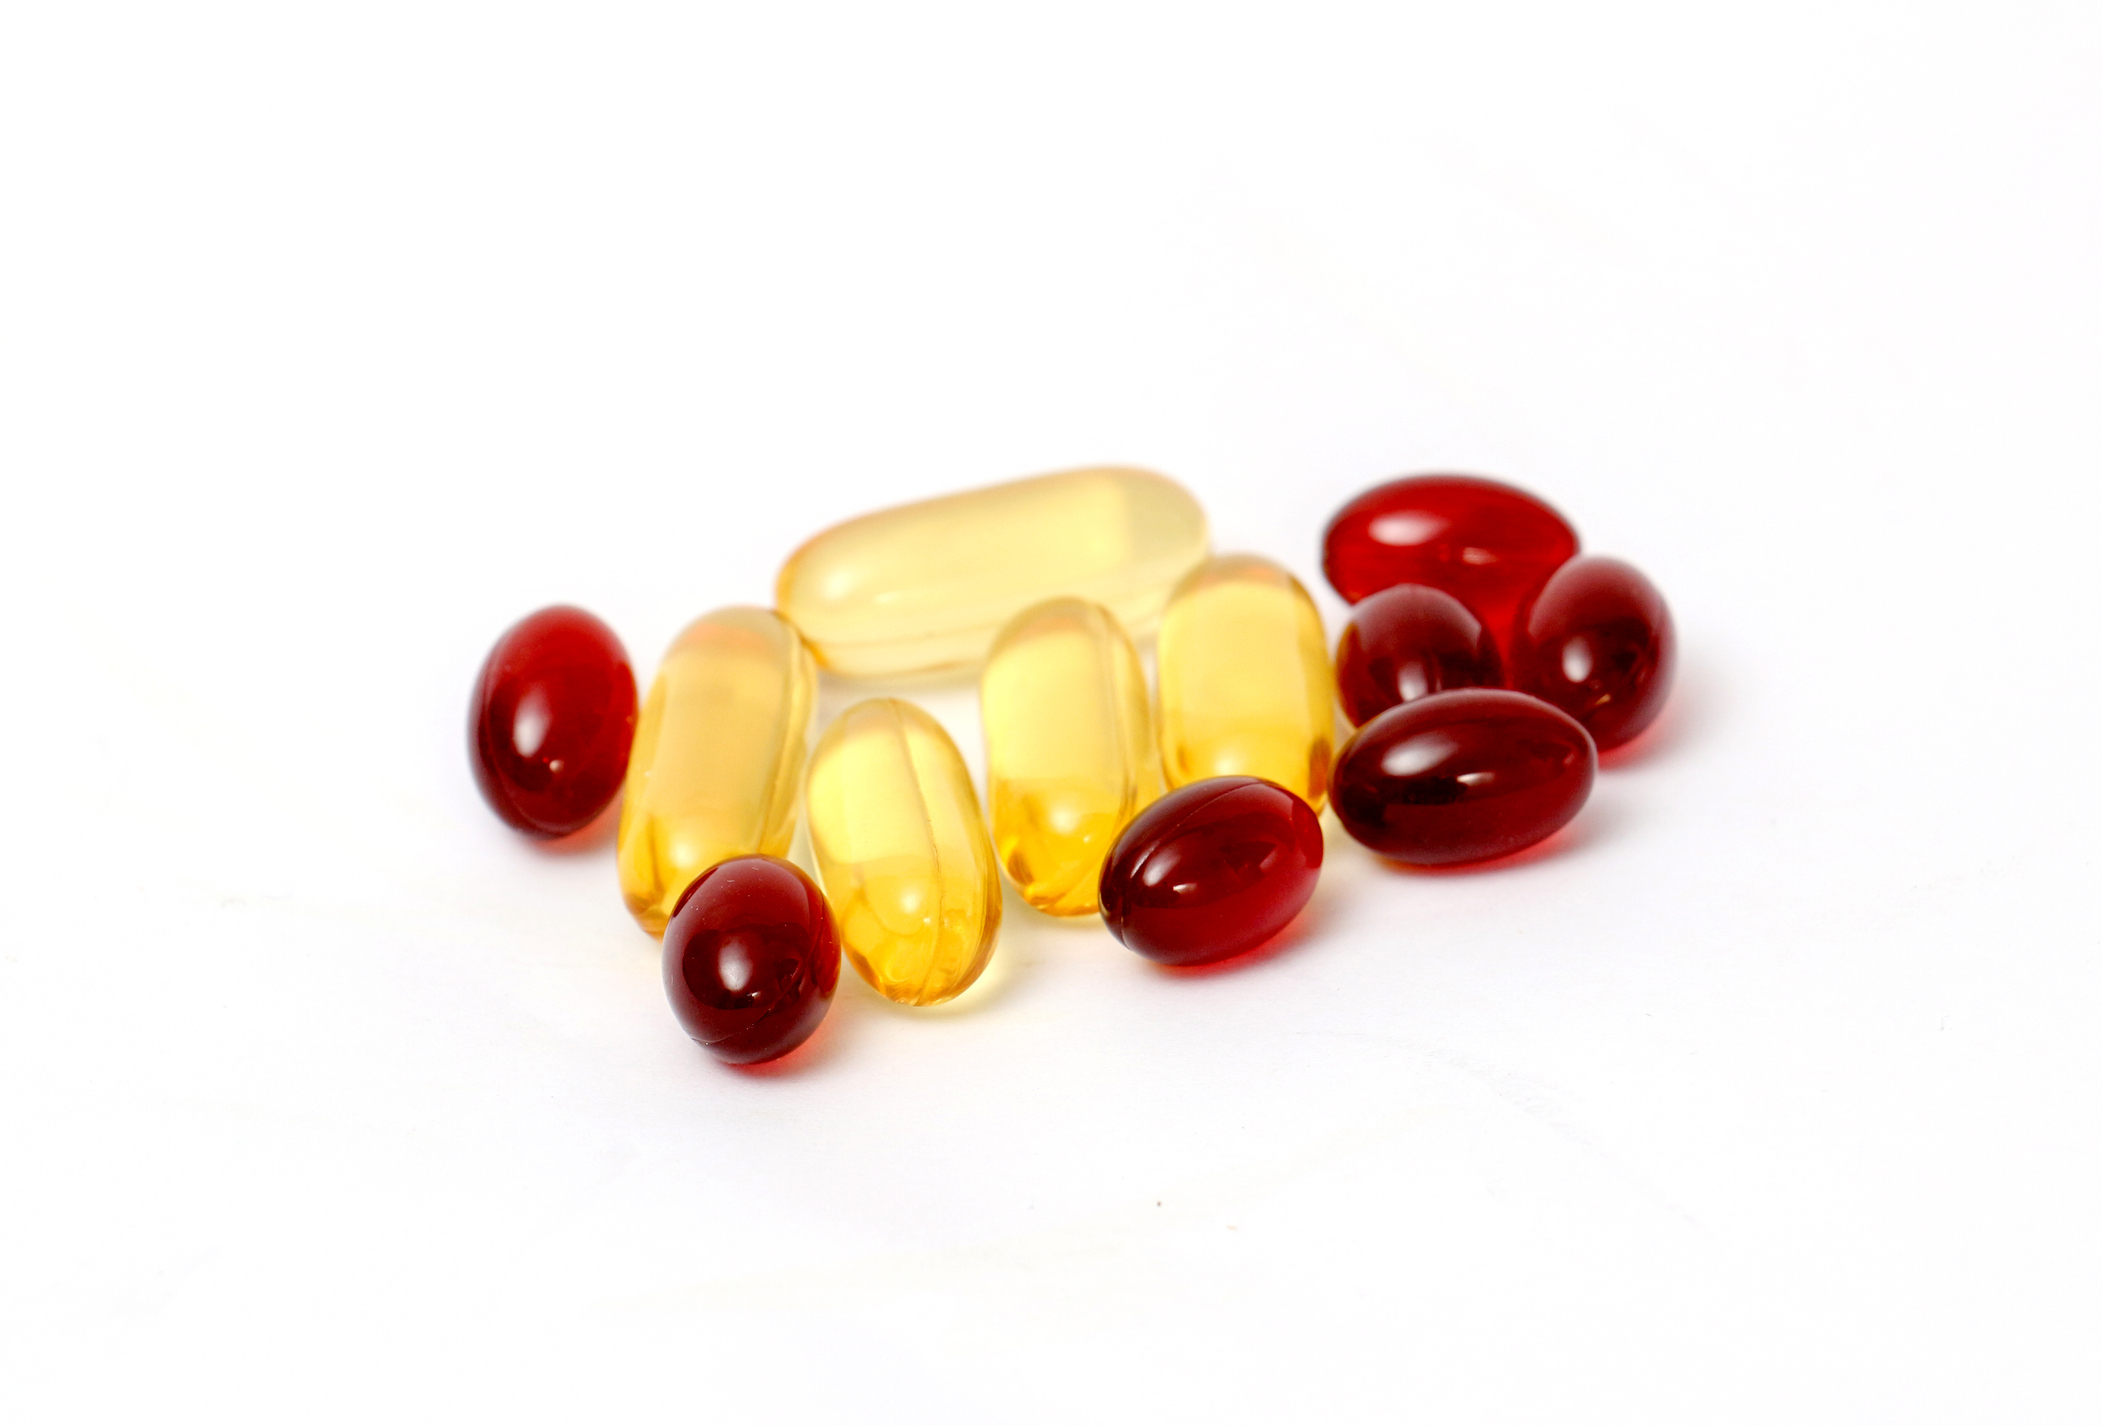 7 reasons to get your omega-3s from krill oil